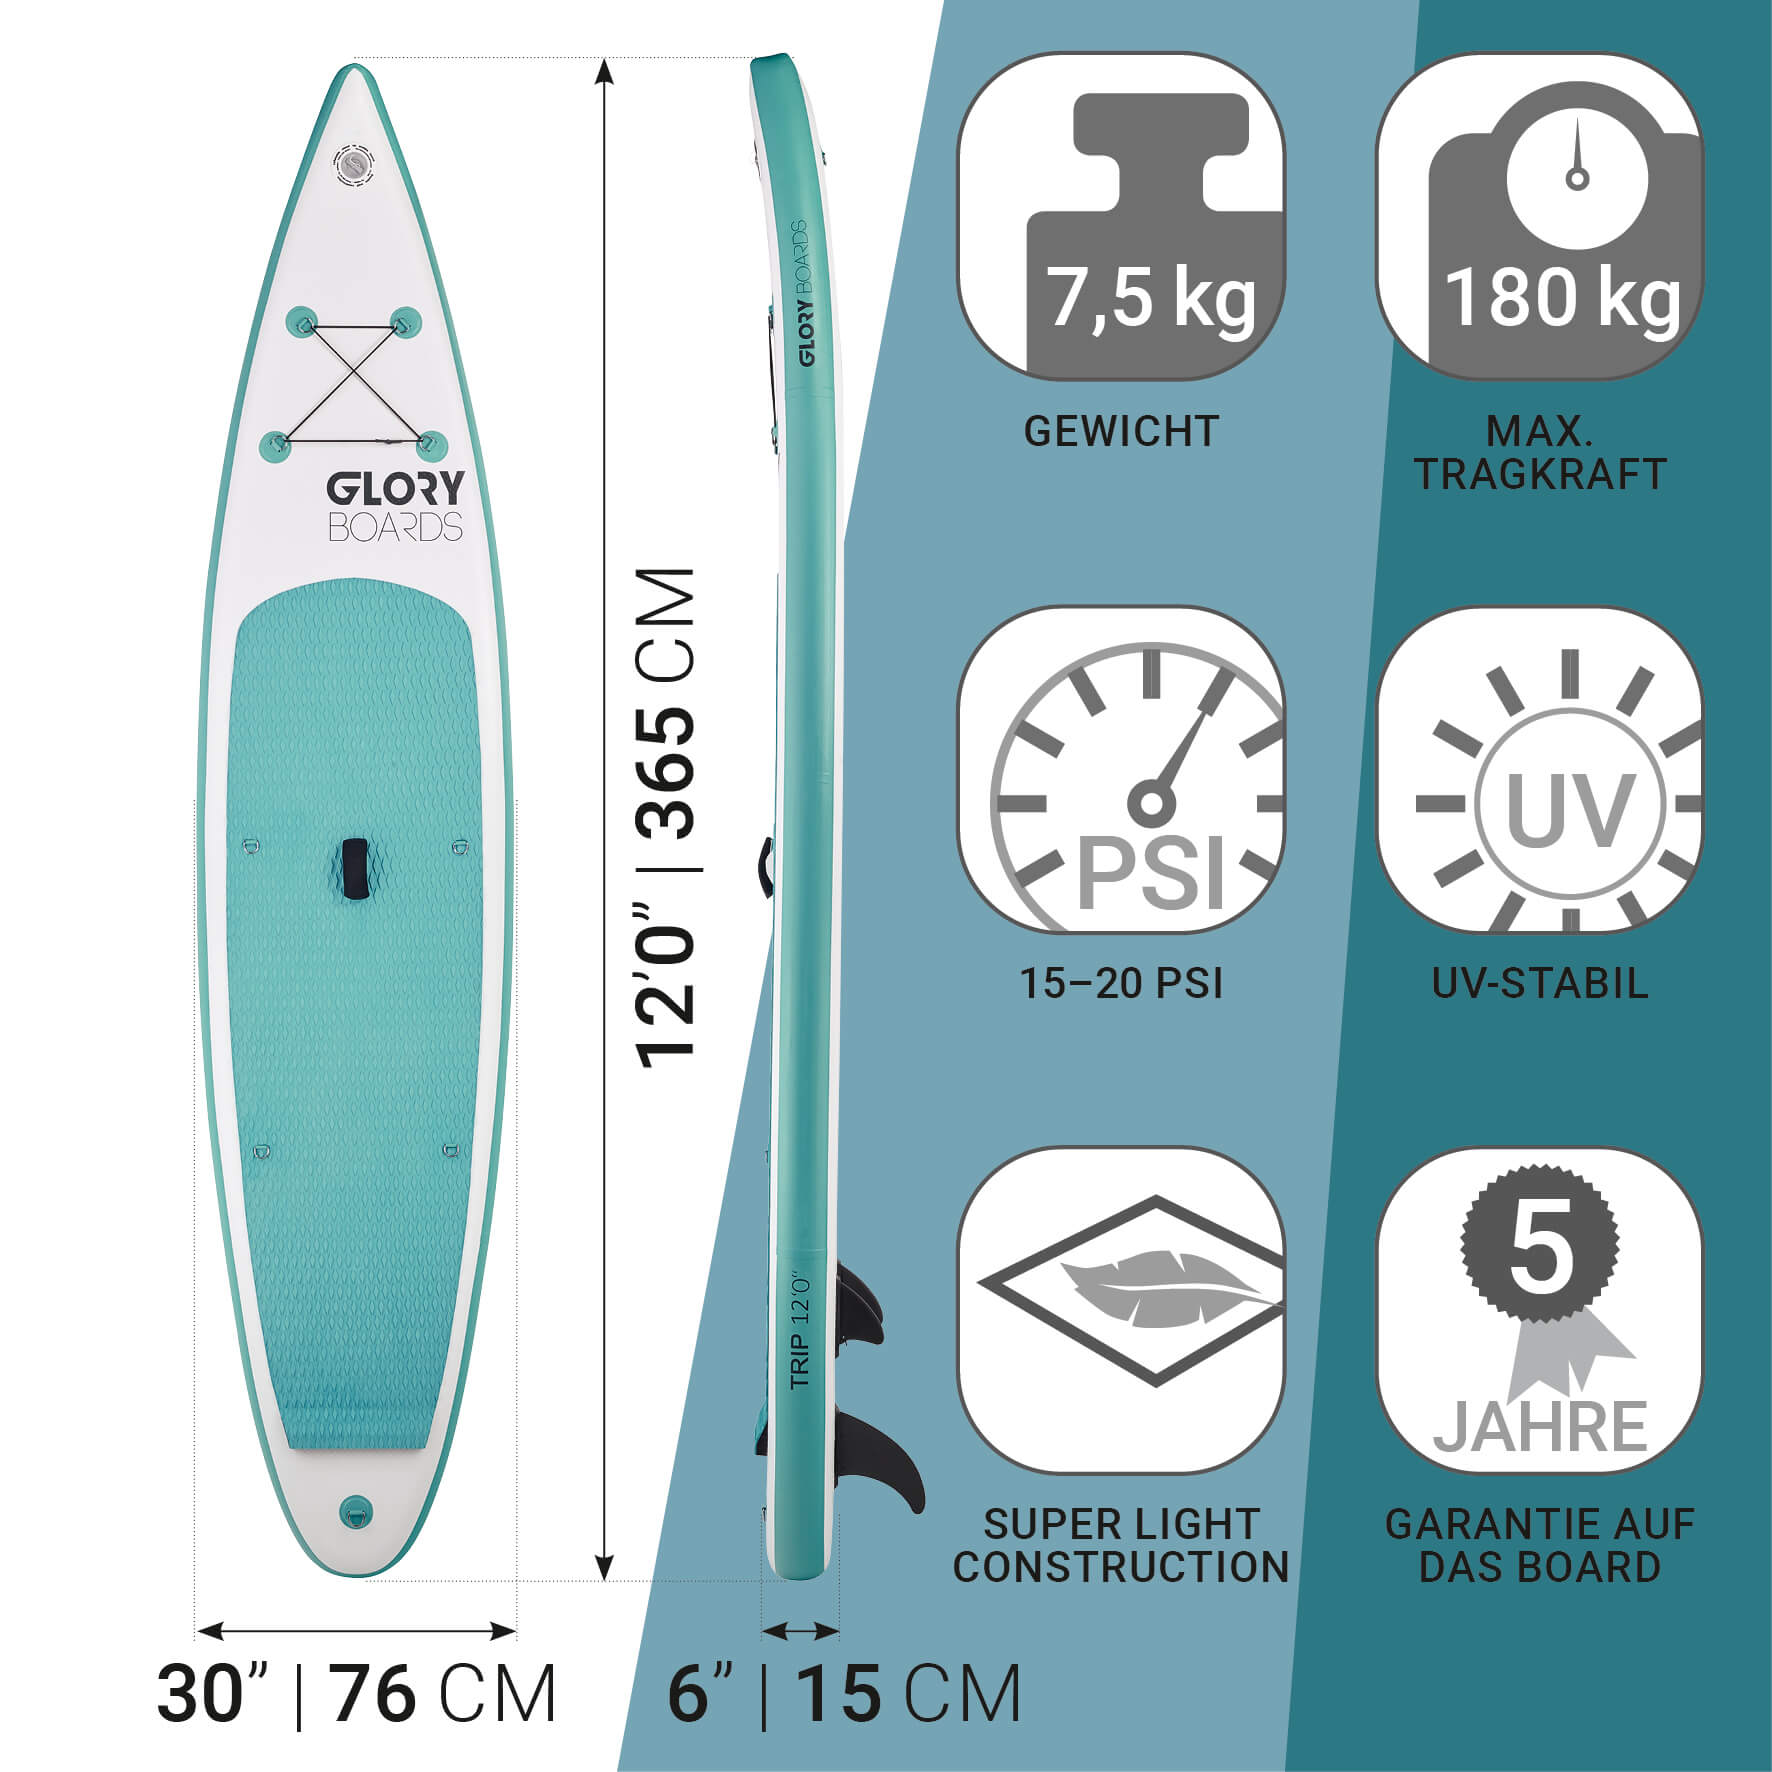 Stand Up Paddle Board "Trip" - The Austrian